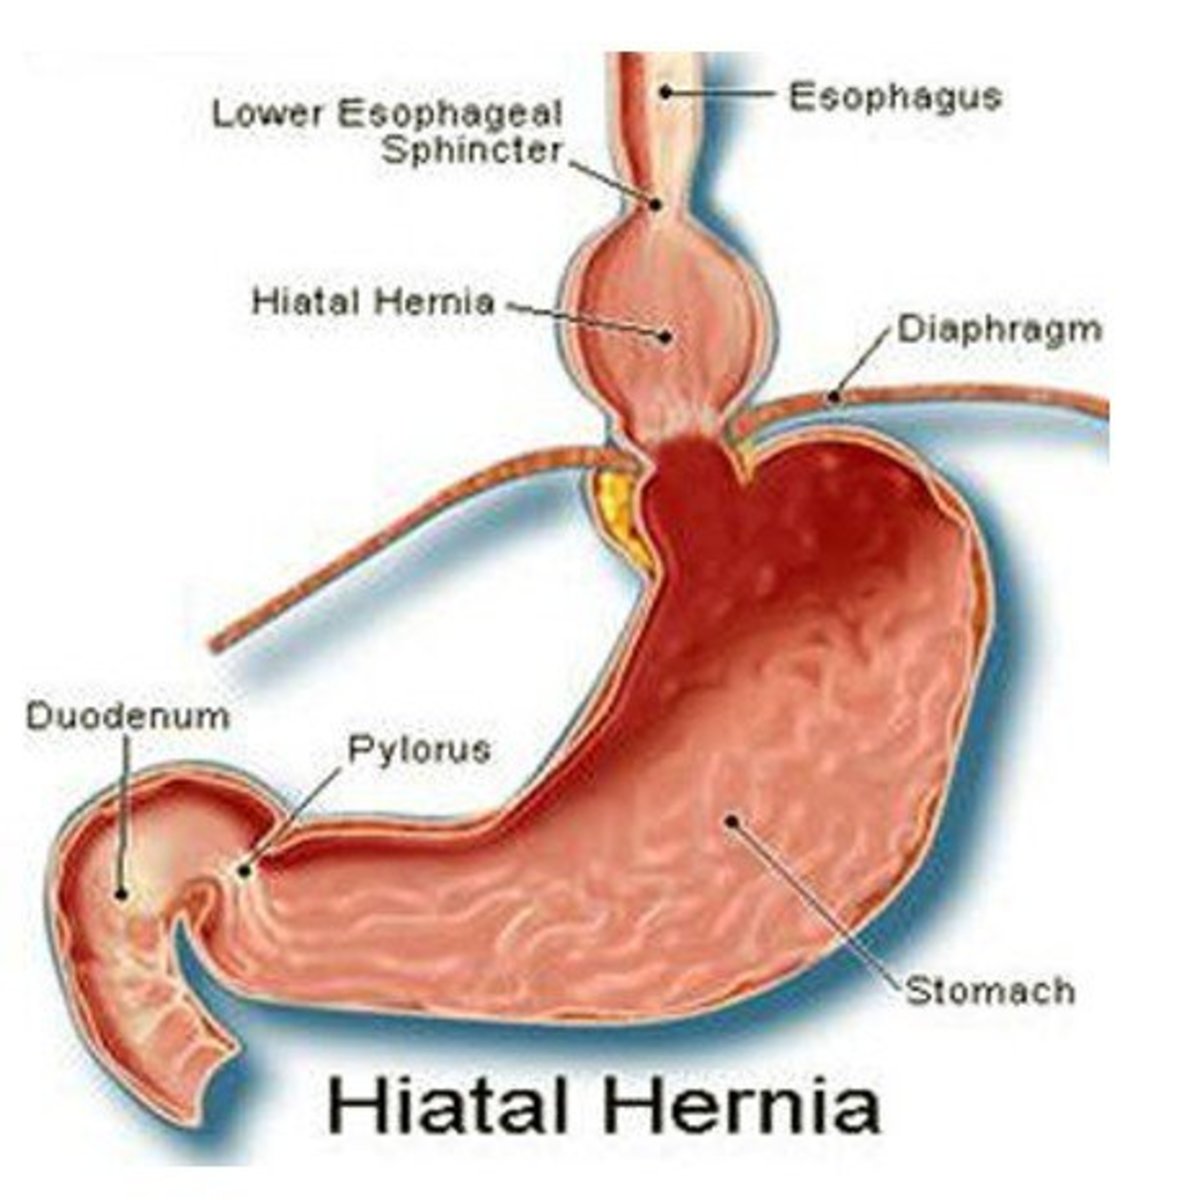 Hiatal Hernia - Pictures, Symptoms, Treatment, Recovery time, Surgery